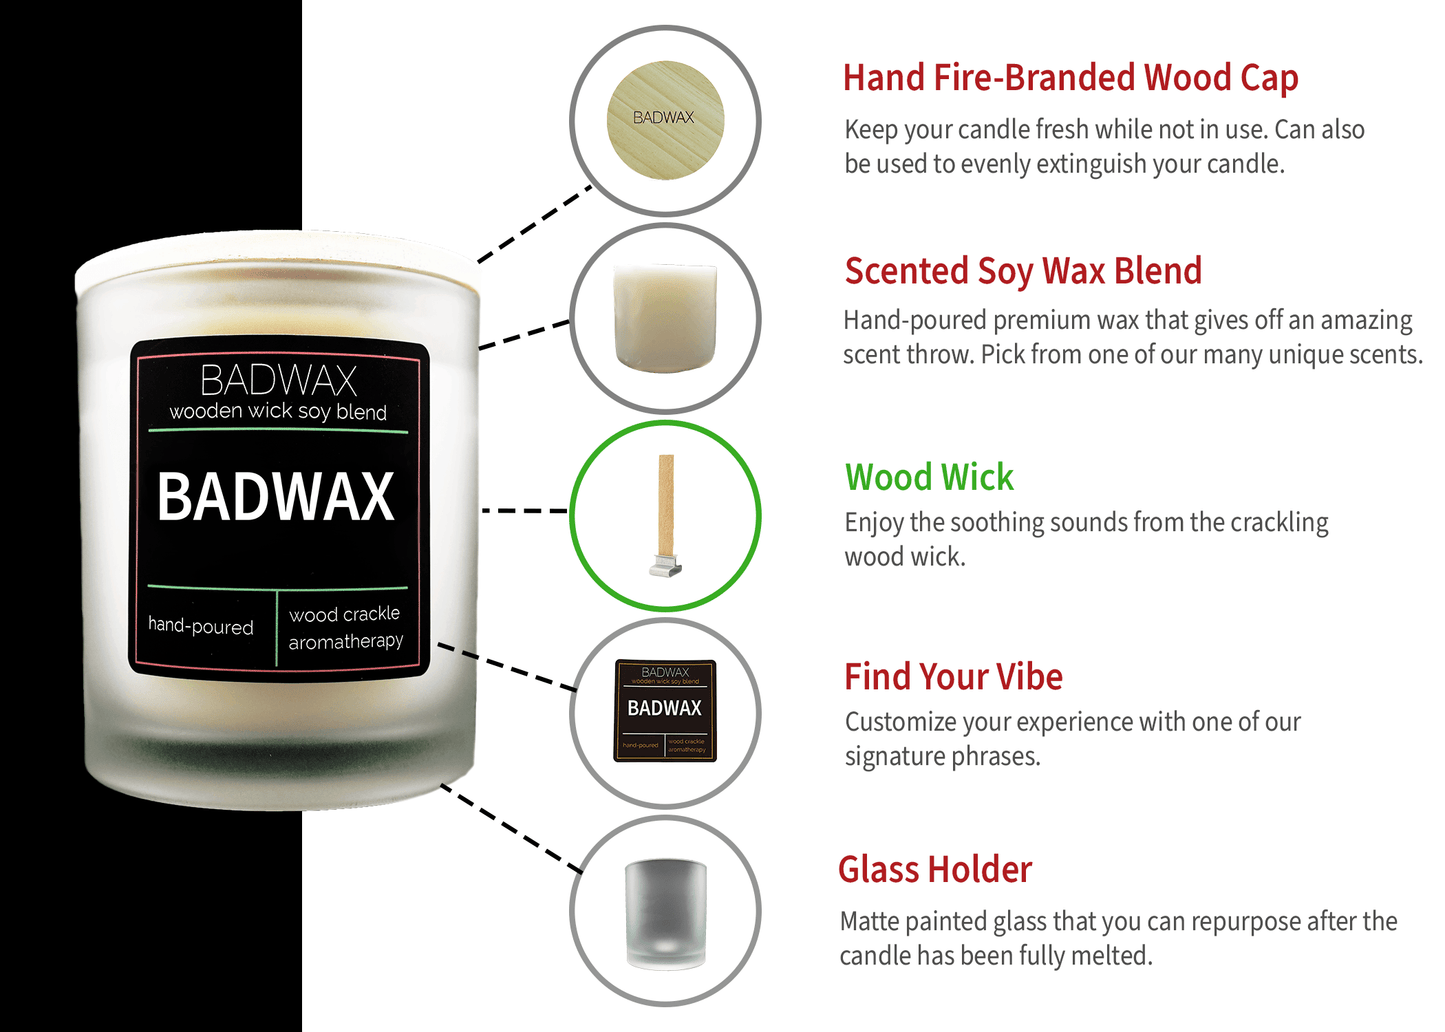 My Favorite Child Gave Me This Candle - Woodwick Candle - BADWAX